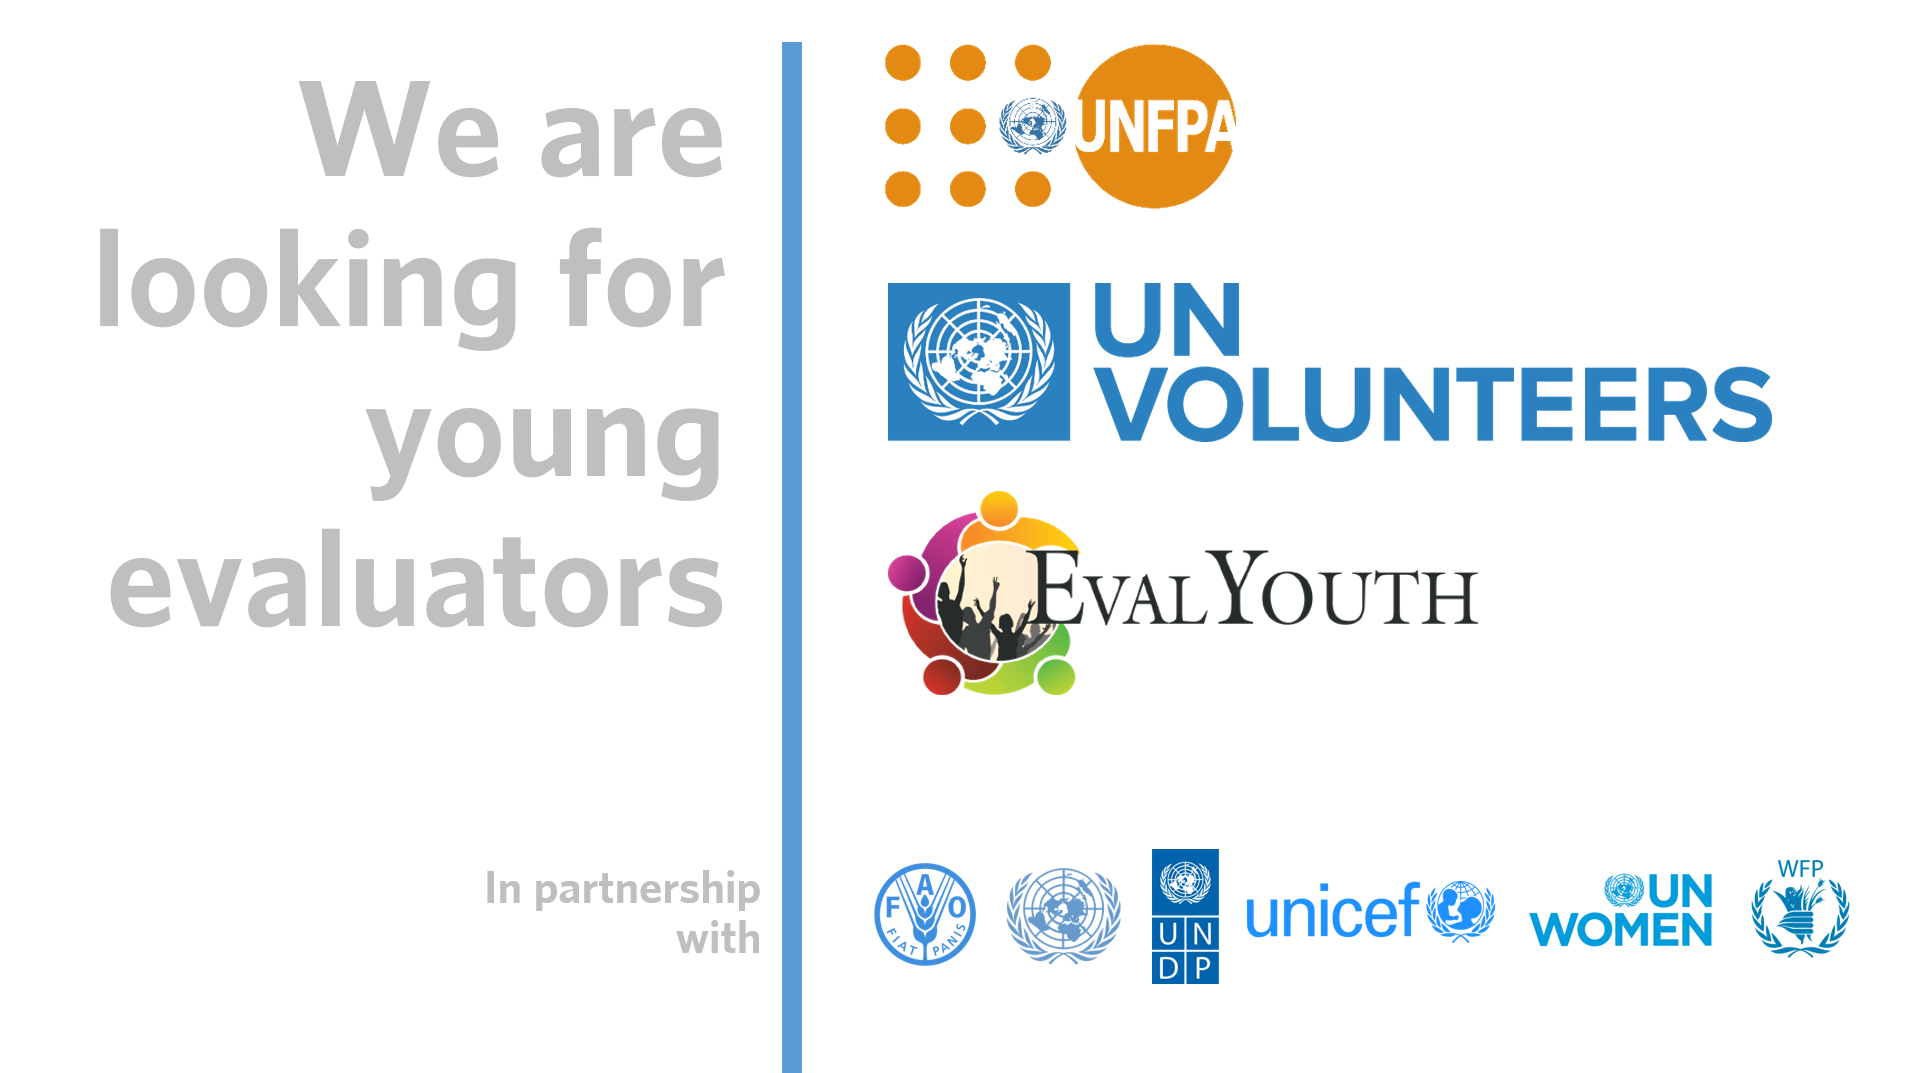 Strengthening the UN system's monitoring and evaluation capacity through the deployment of young evaluators